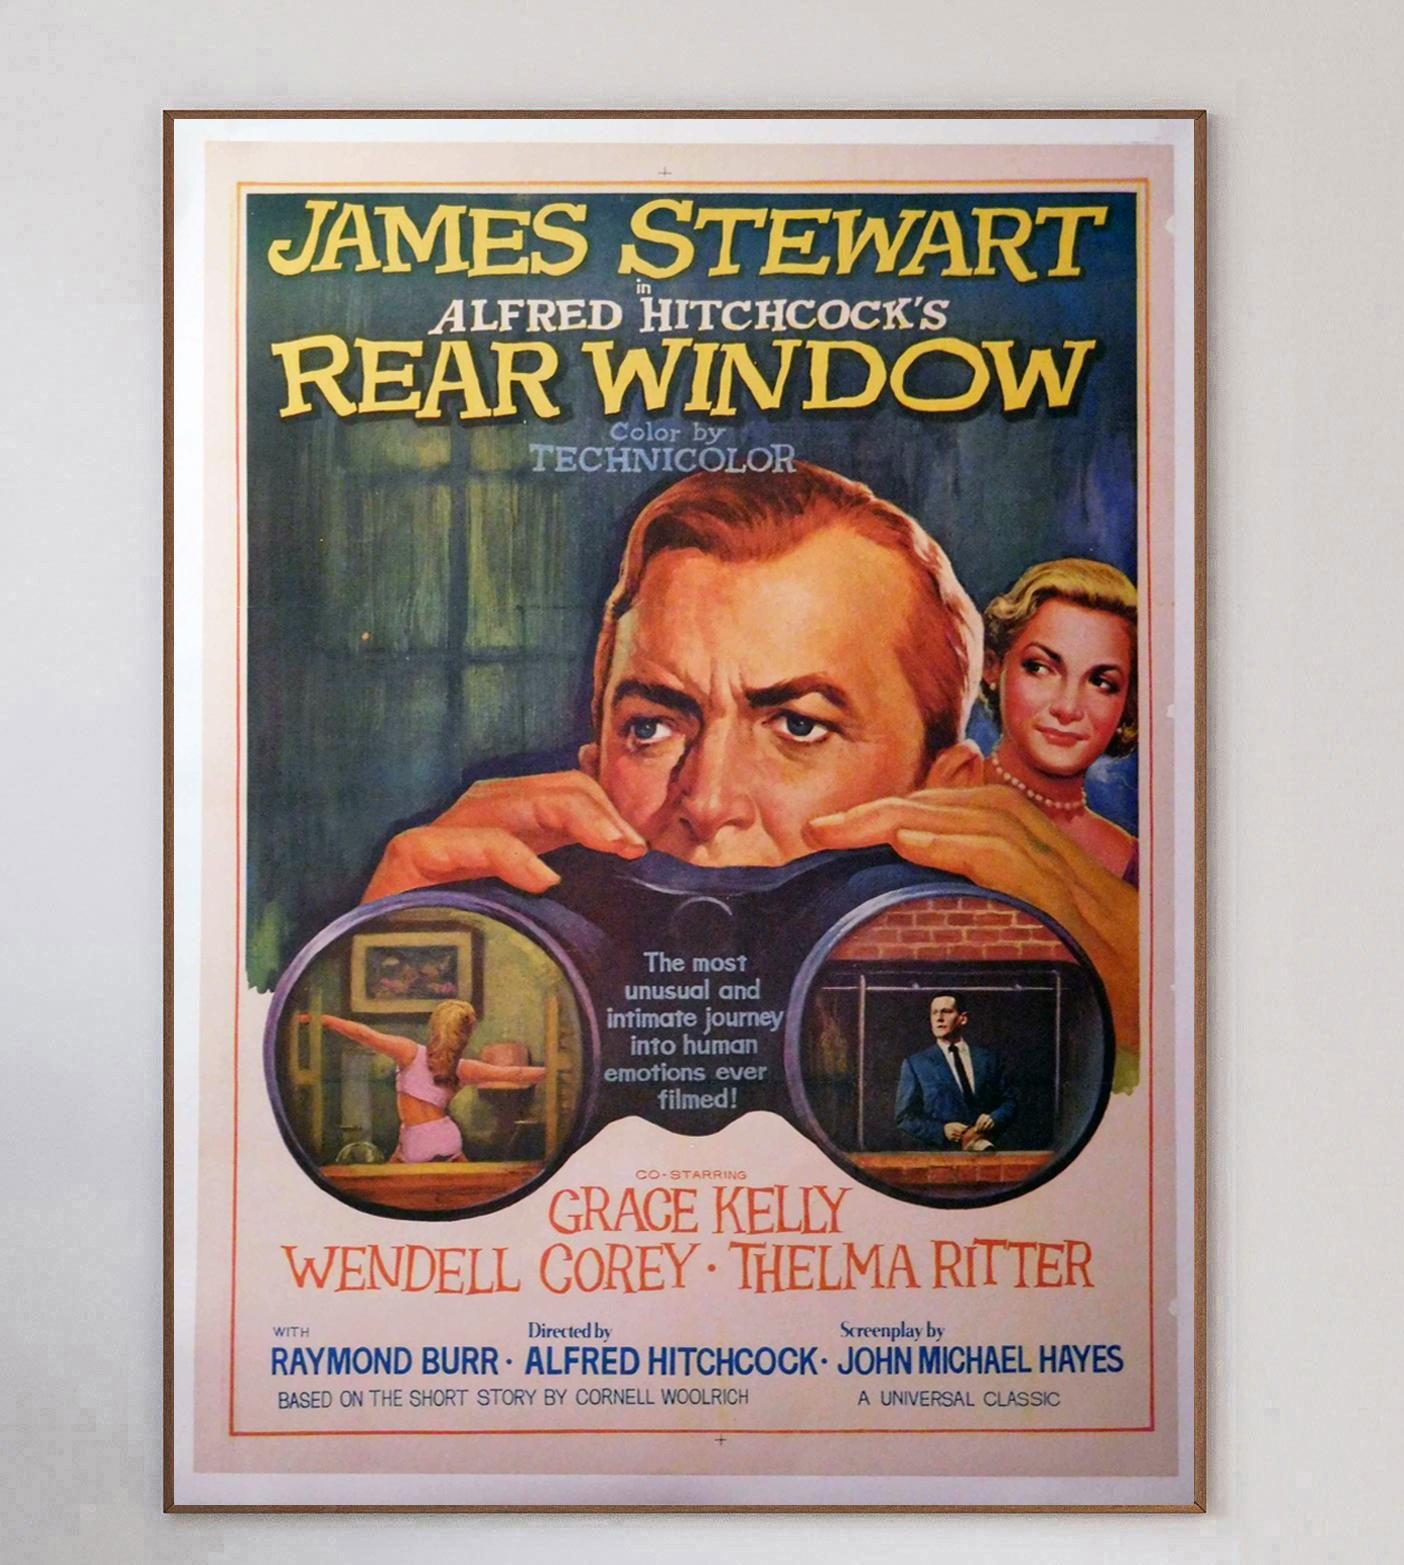 Widely ranked as one of Alfred Hitchcock's greatest films and among the greatest of all time, 